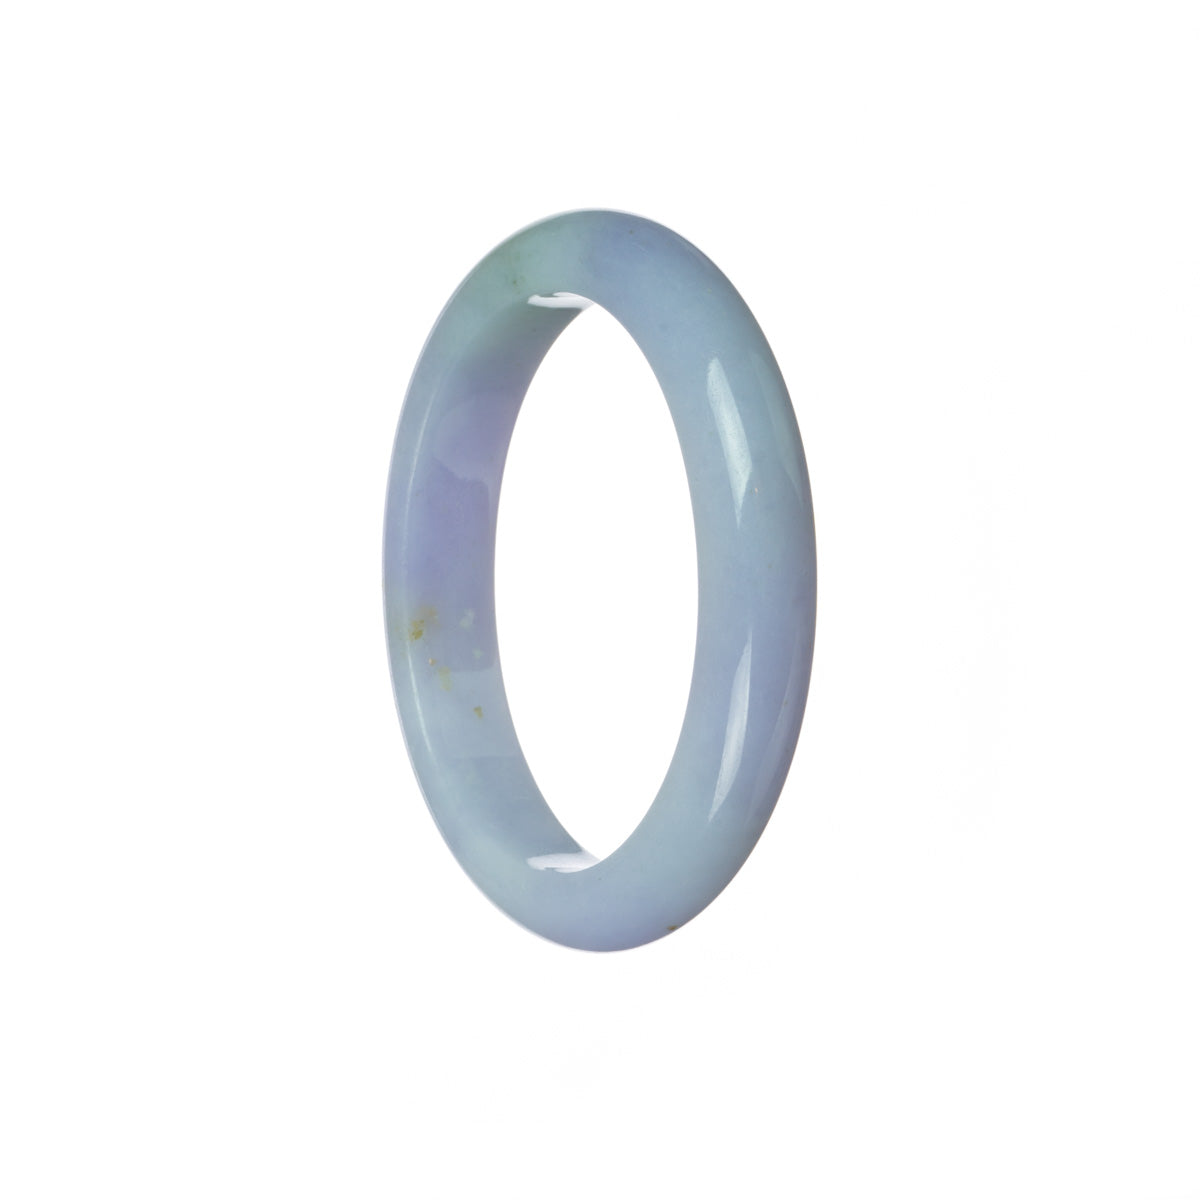 A lavender jade bangle with a Grade A quality, featuring an oval shape measuring 50mm. This bangle is authentic and is a product of MAYS™.